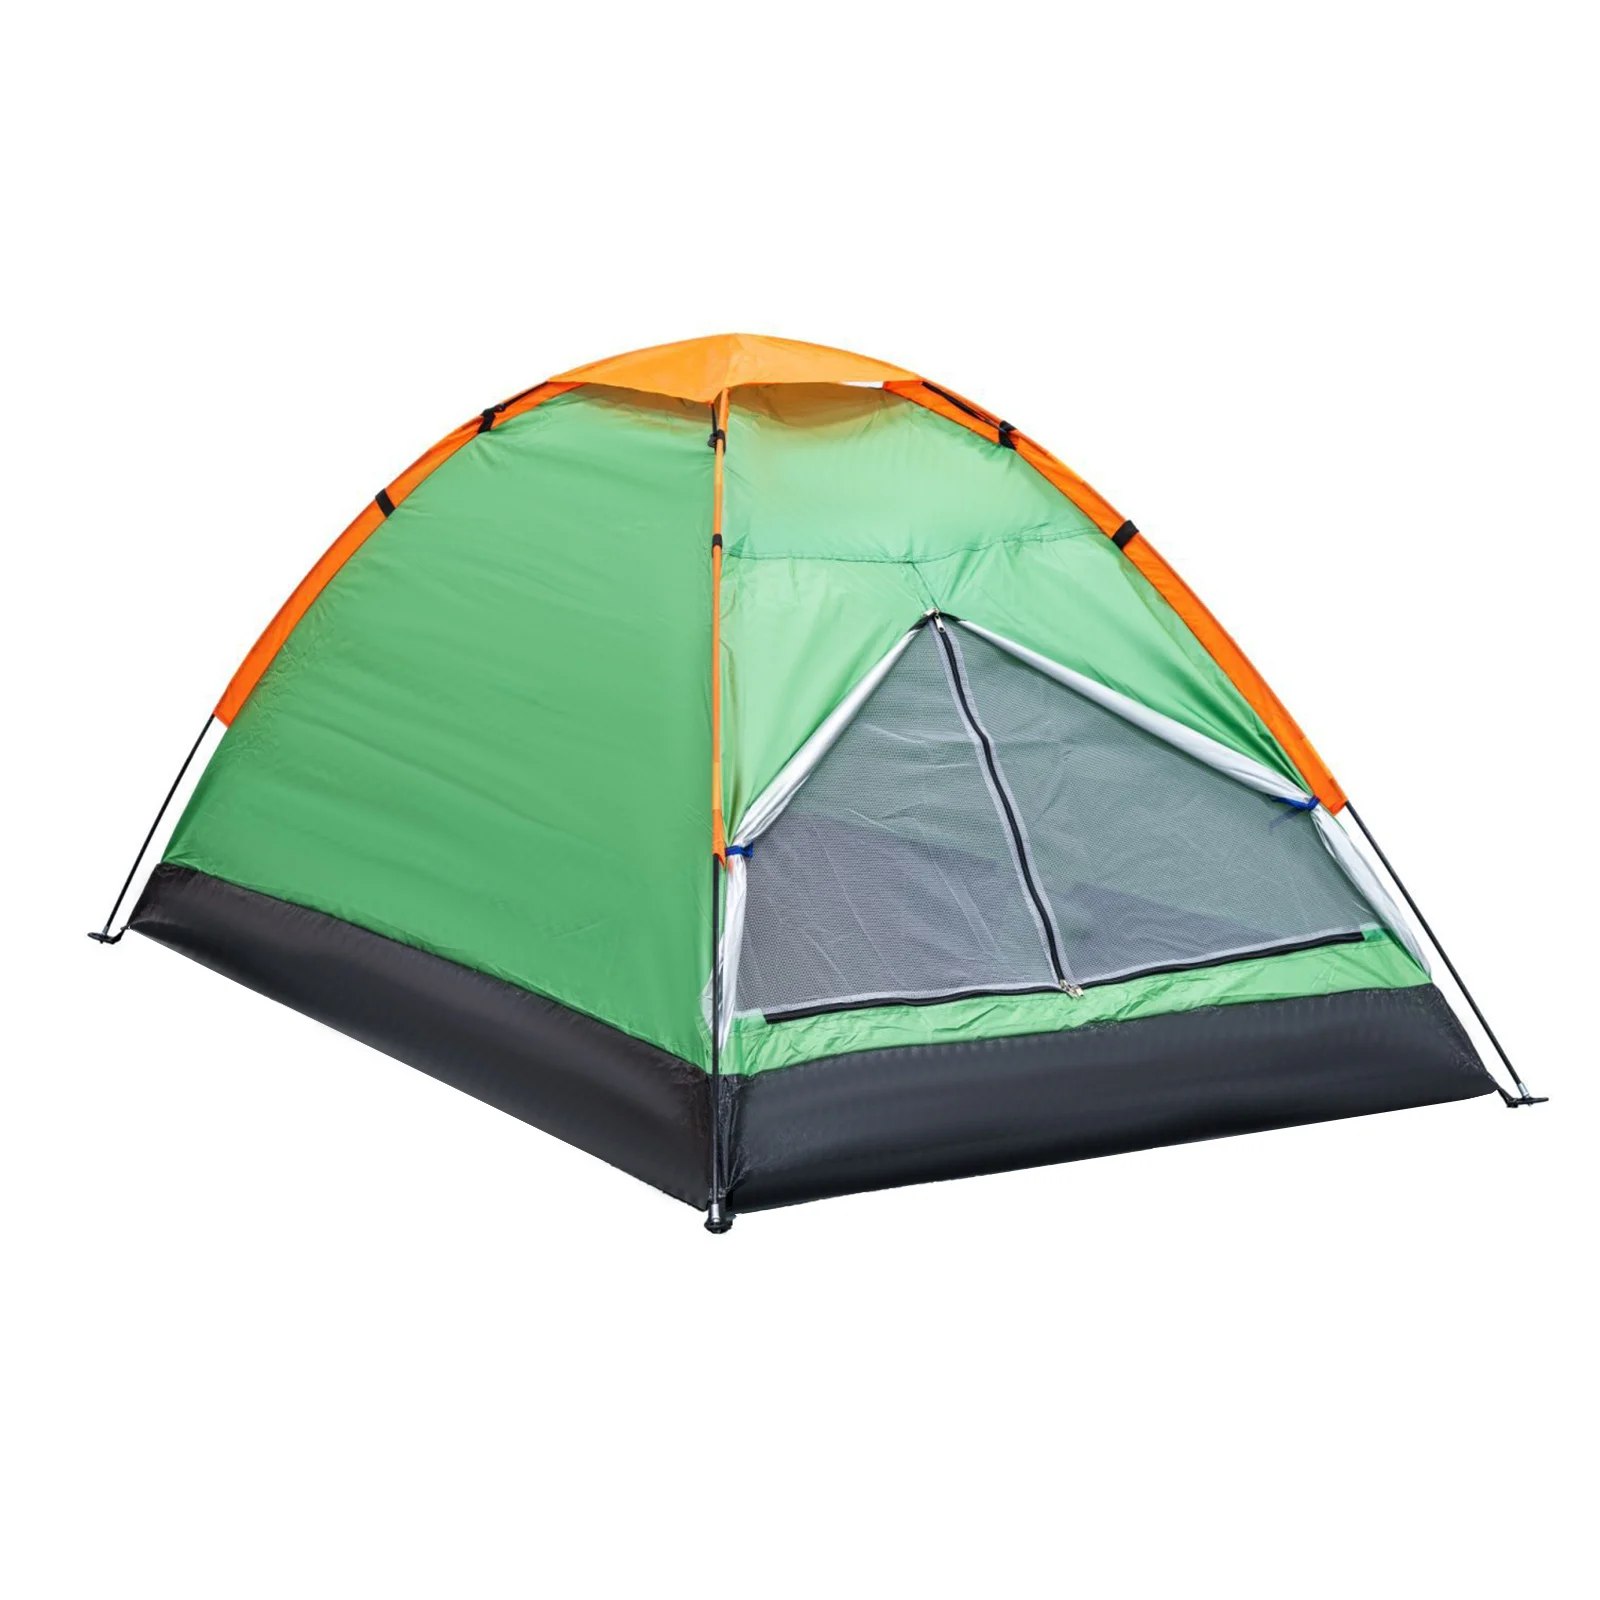 

Canopies Tent With Rain Fly With Carrying Bag 190T Polyester 2-Person Backpacking Compact Beach Indoor/outdoor